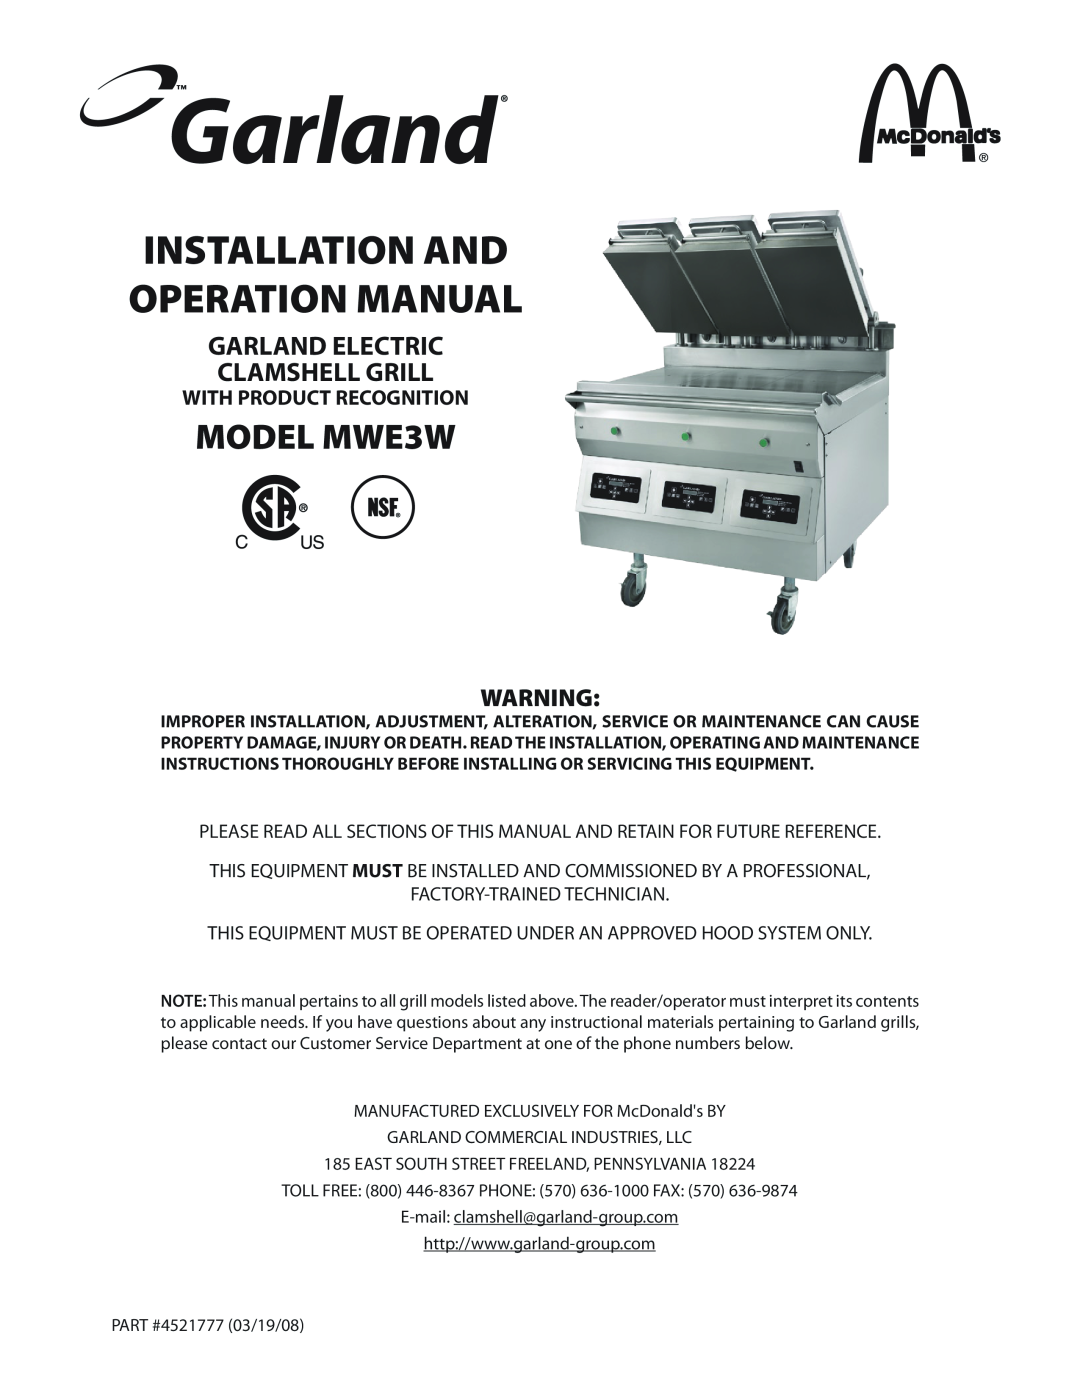 Garland operation manual With Product Recognition, MODEL MWE3W, Garland Electric Clamshell Grill 